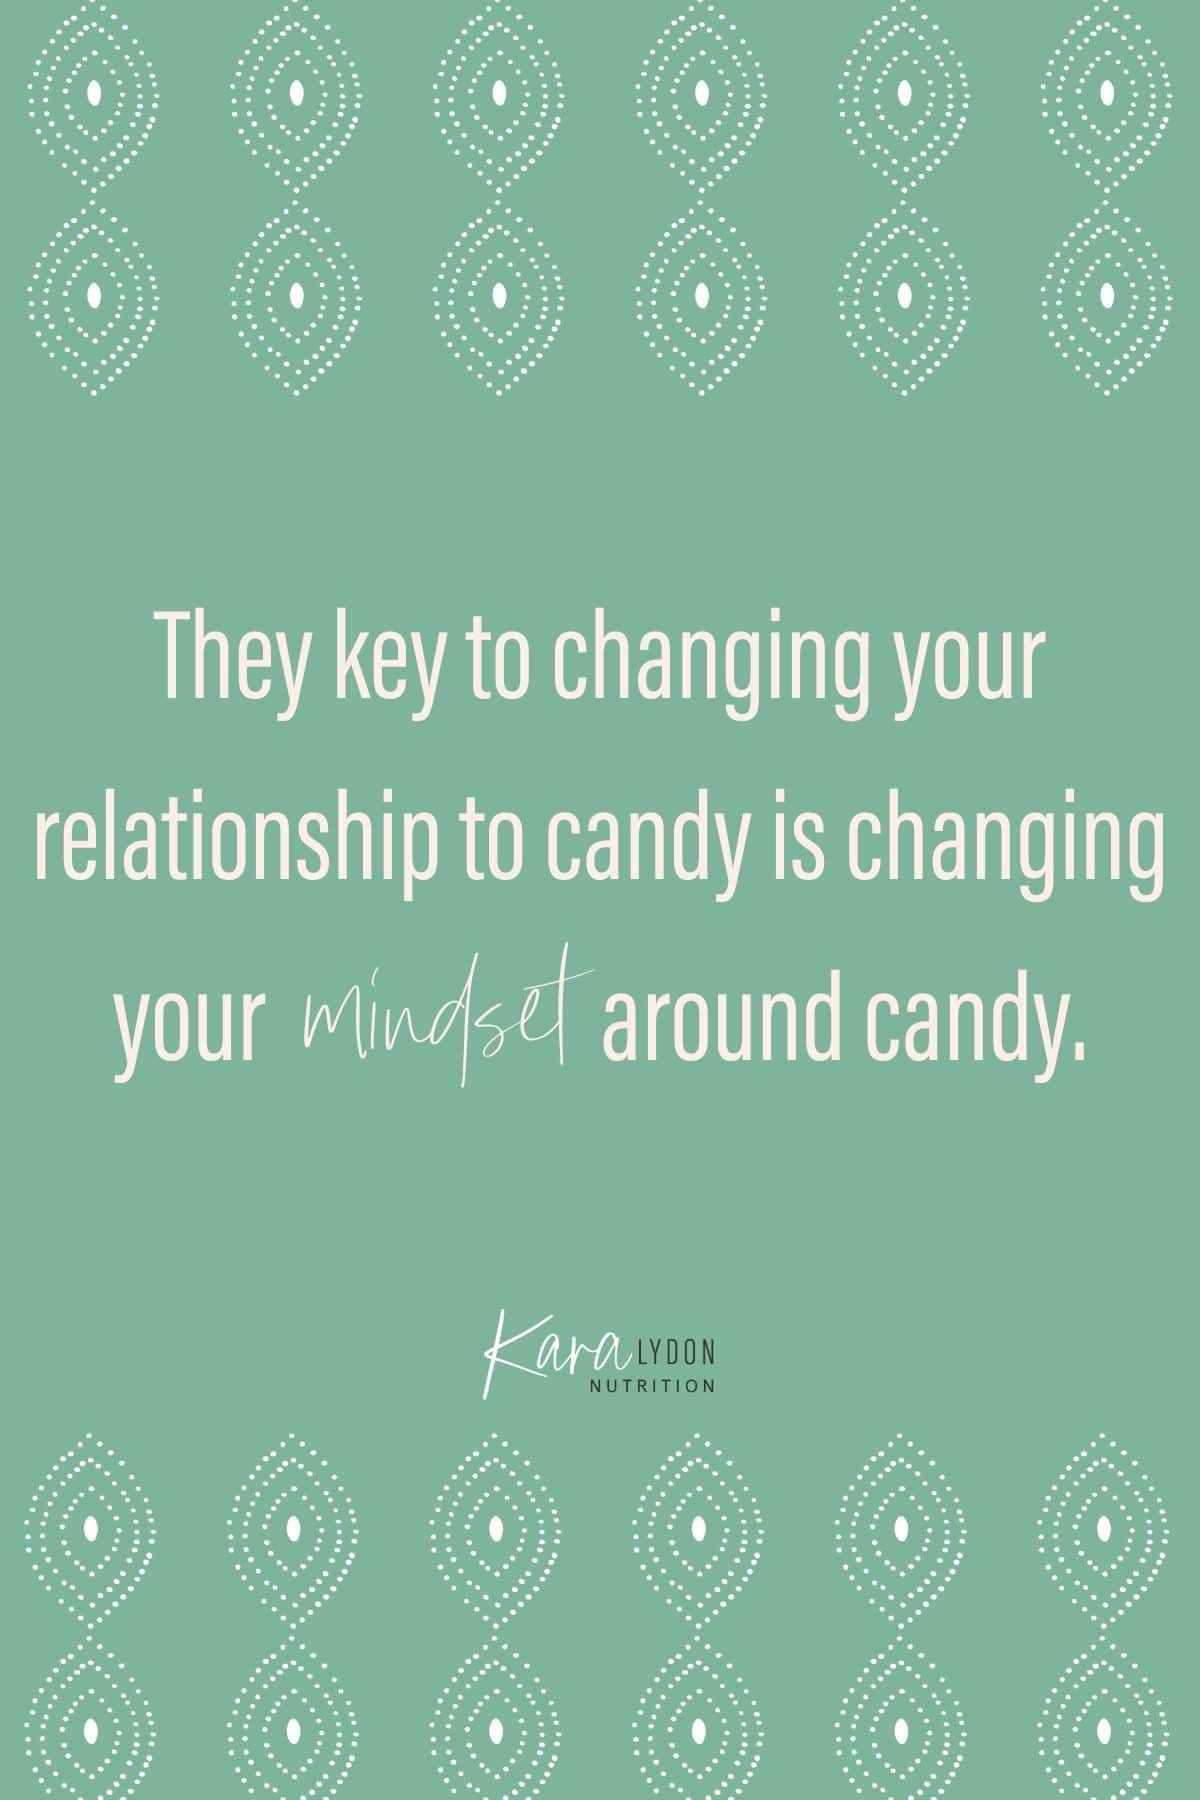 Graphic with quote: "The key to changing your relationship to candy is changing your mindset around candy."